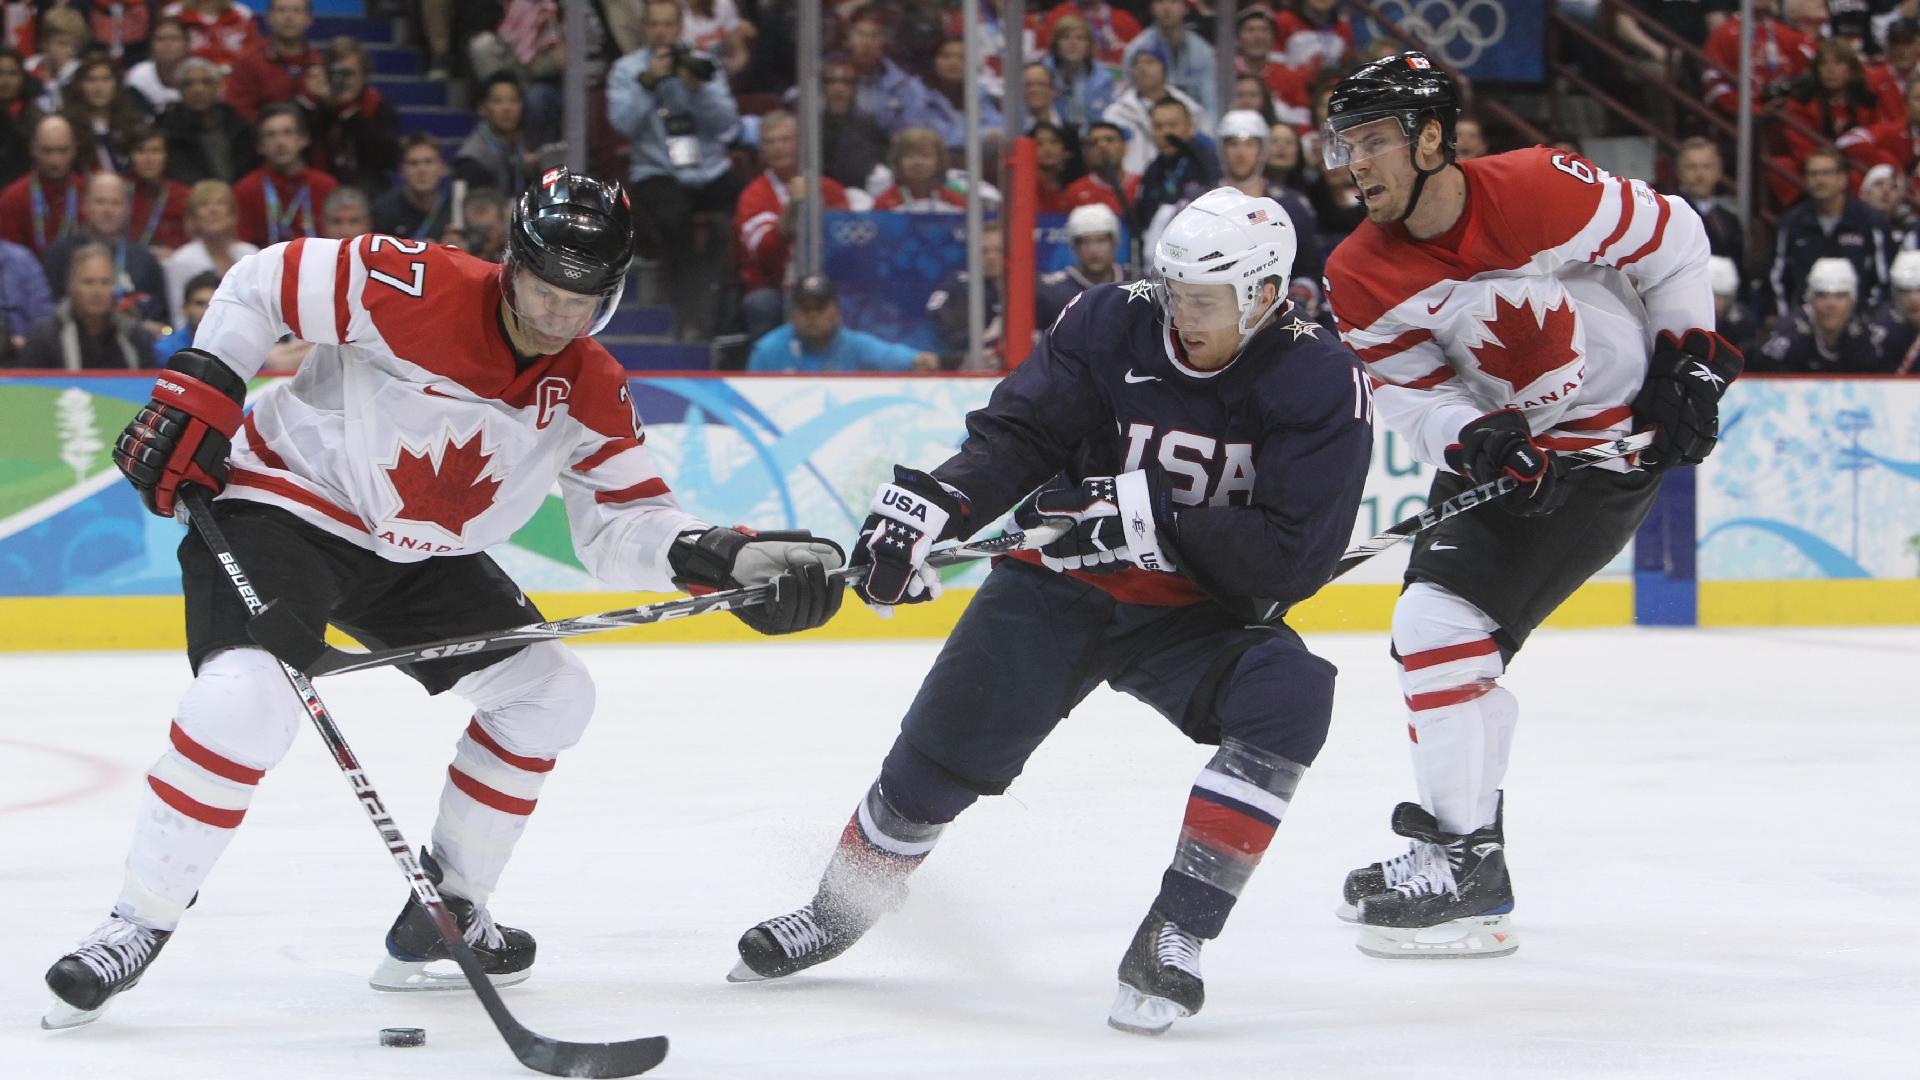 ice hockey at the 2022 winter olympics – men's team rosters